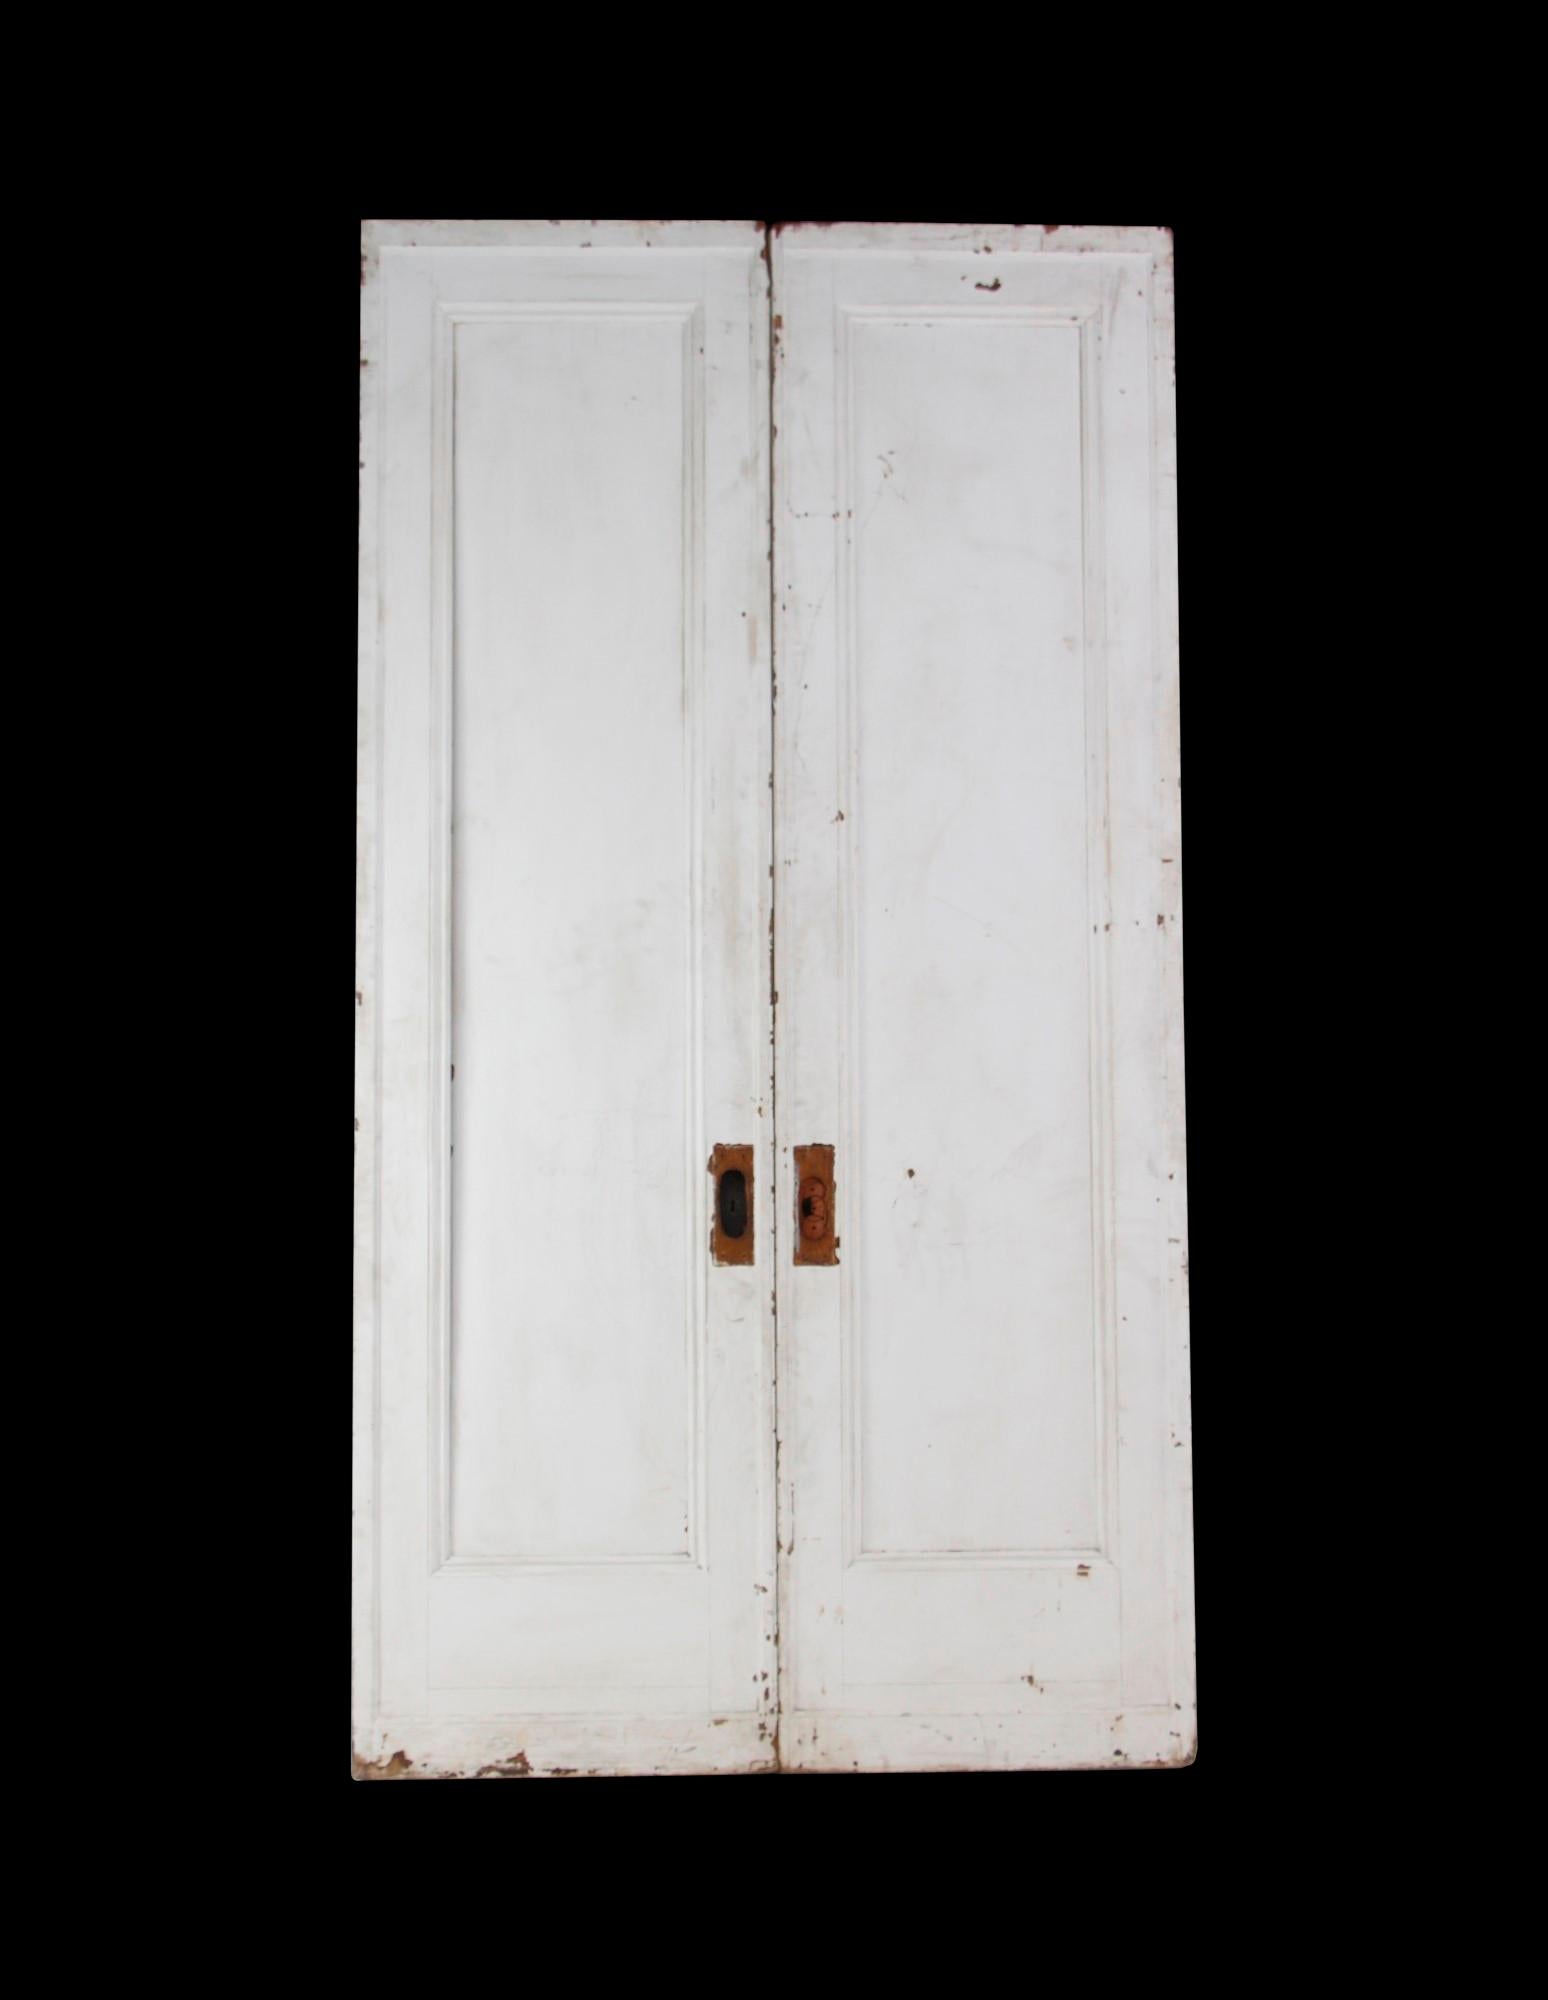 Antique dark tone wood double pocket doors painted white on one side. They are tall and slender featuring a single vertical panel. Priced as a double. This can be seen at our 400 Gilligan St location in Scranton, PA. Measures: 105.78 x 56.25.